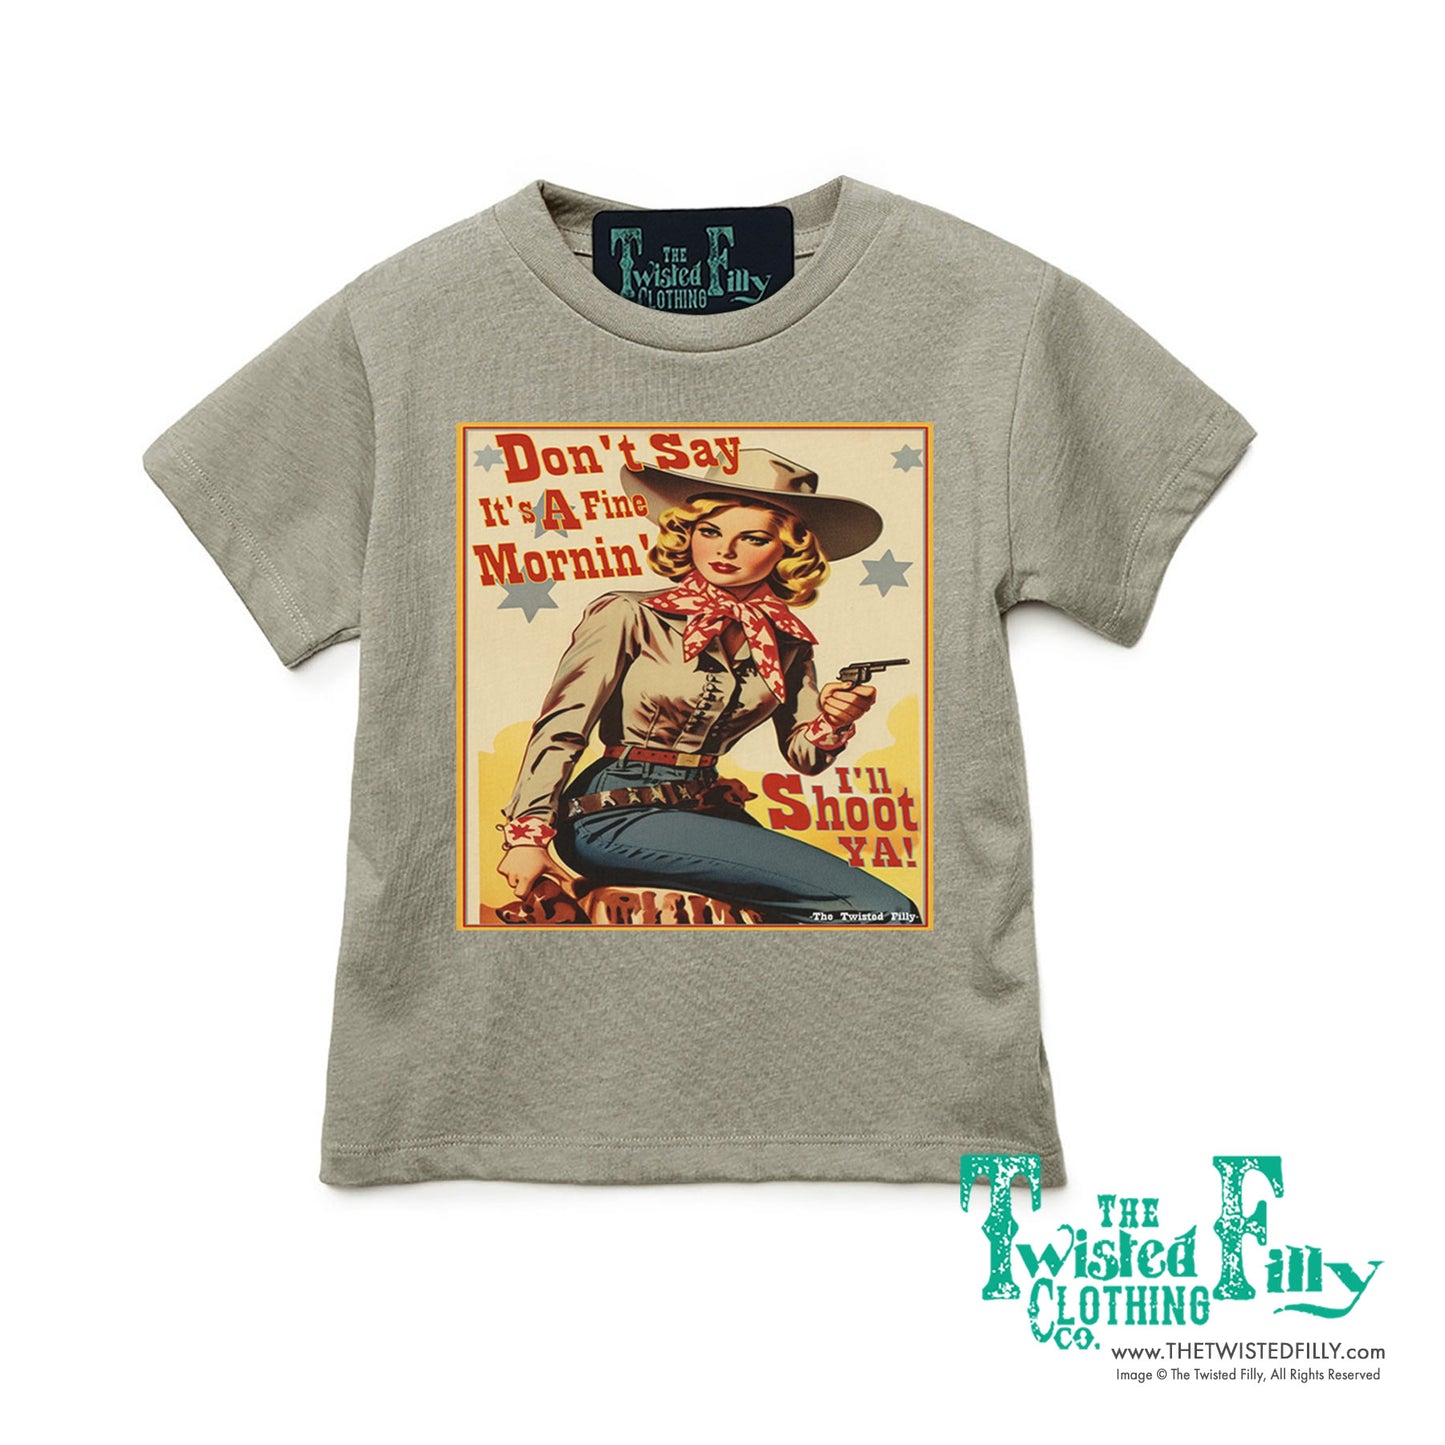 Don't Say It's A Fine Mornin' - S/S Girls Toddler Tee - Assorted Colors